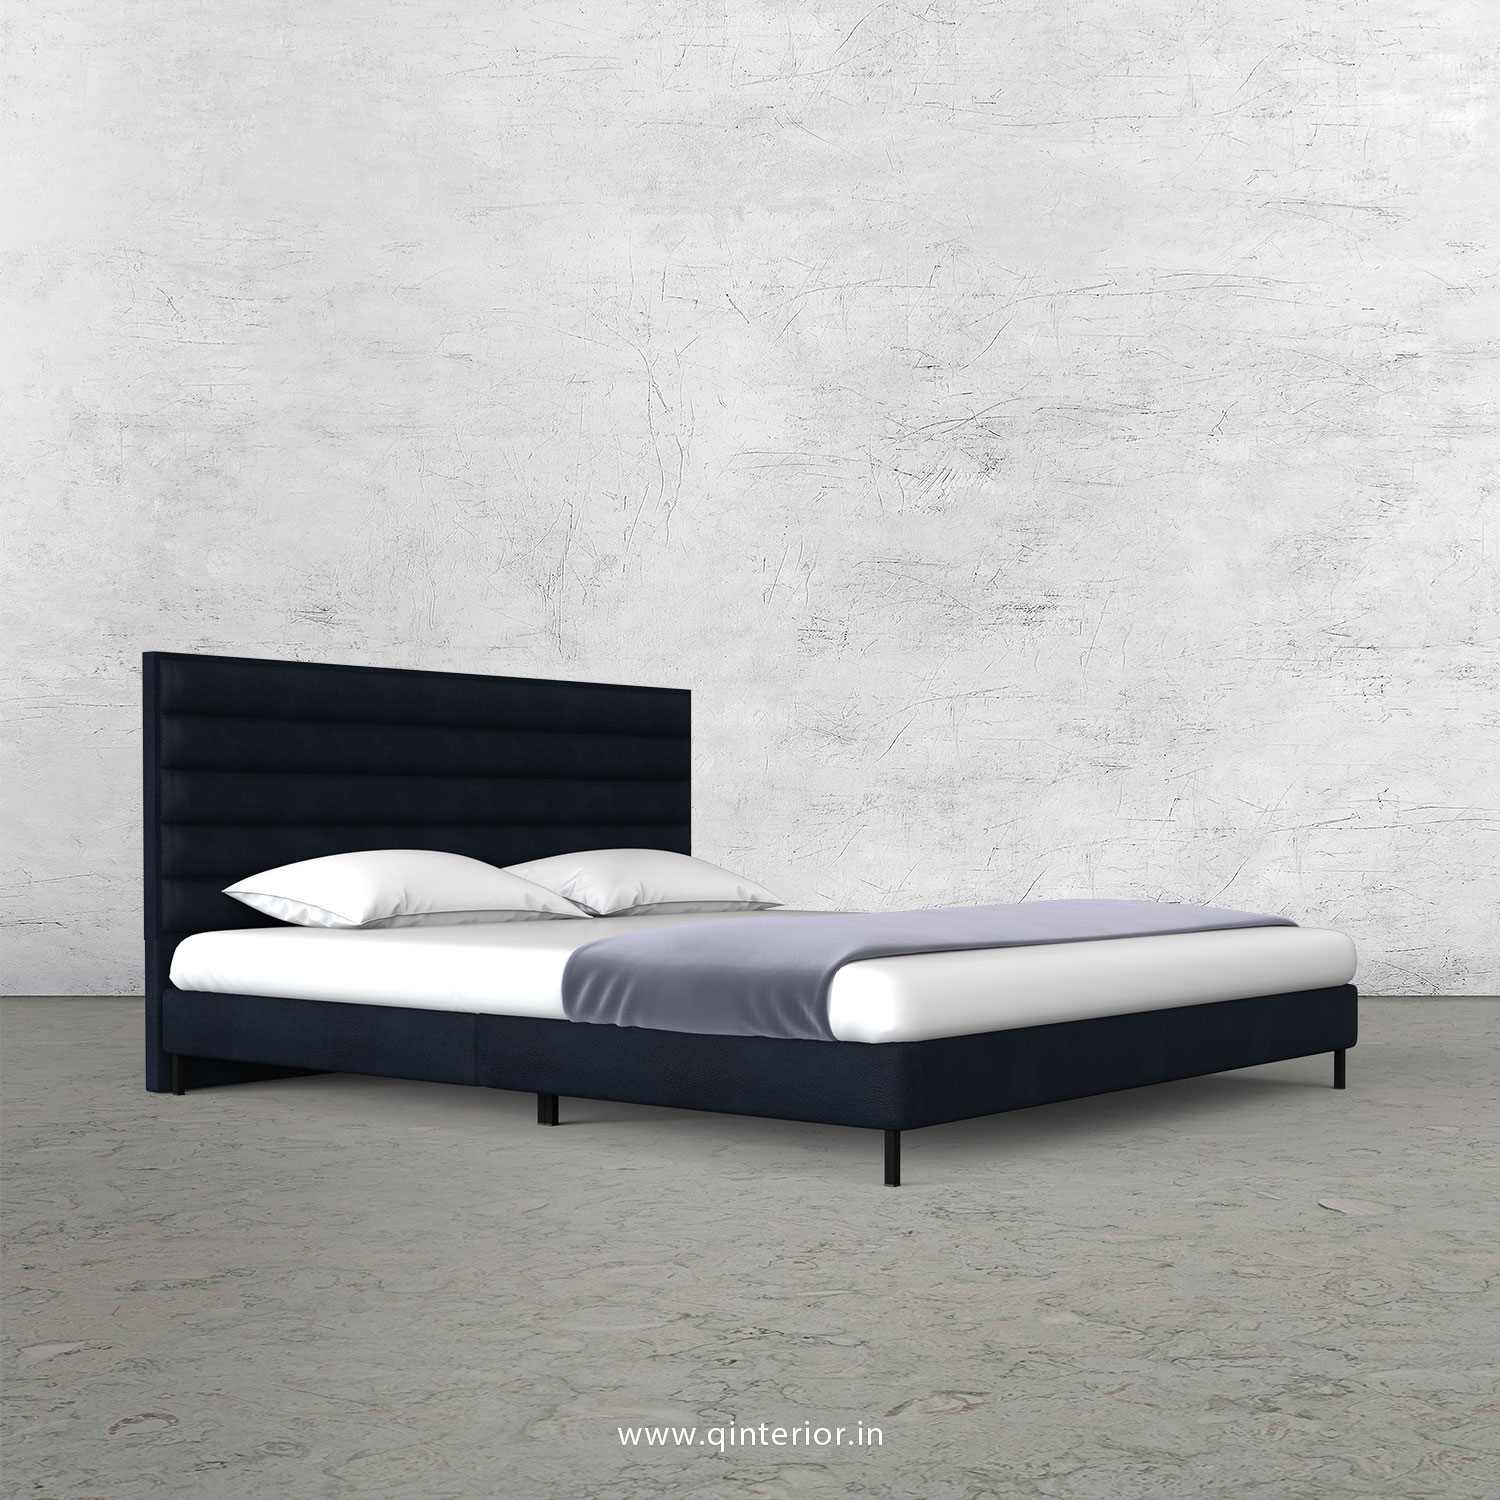 Crux King Size Bed in Fab Leather Fabric - KBD003 FL05